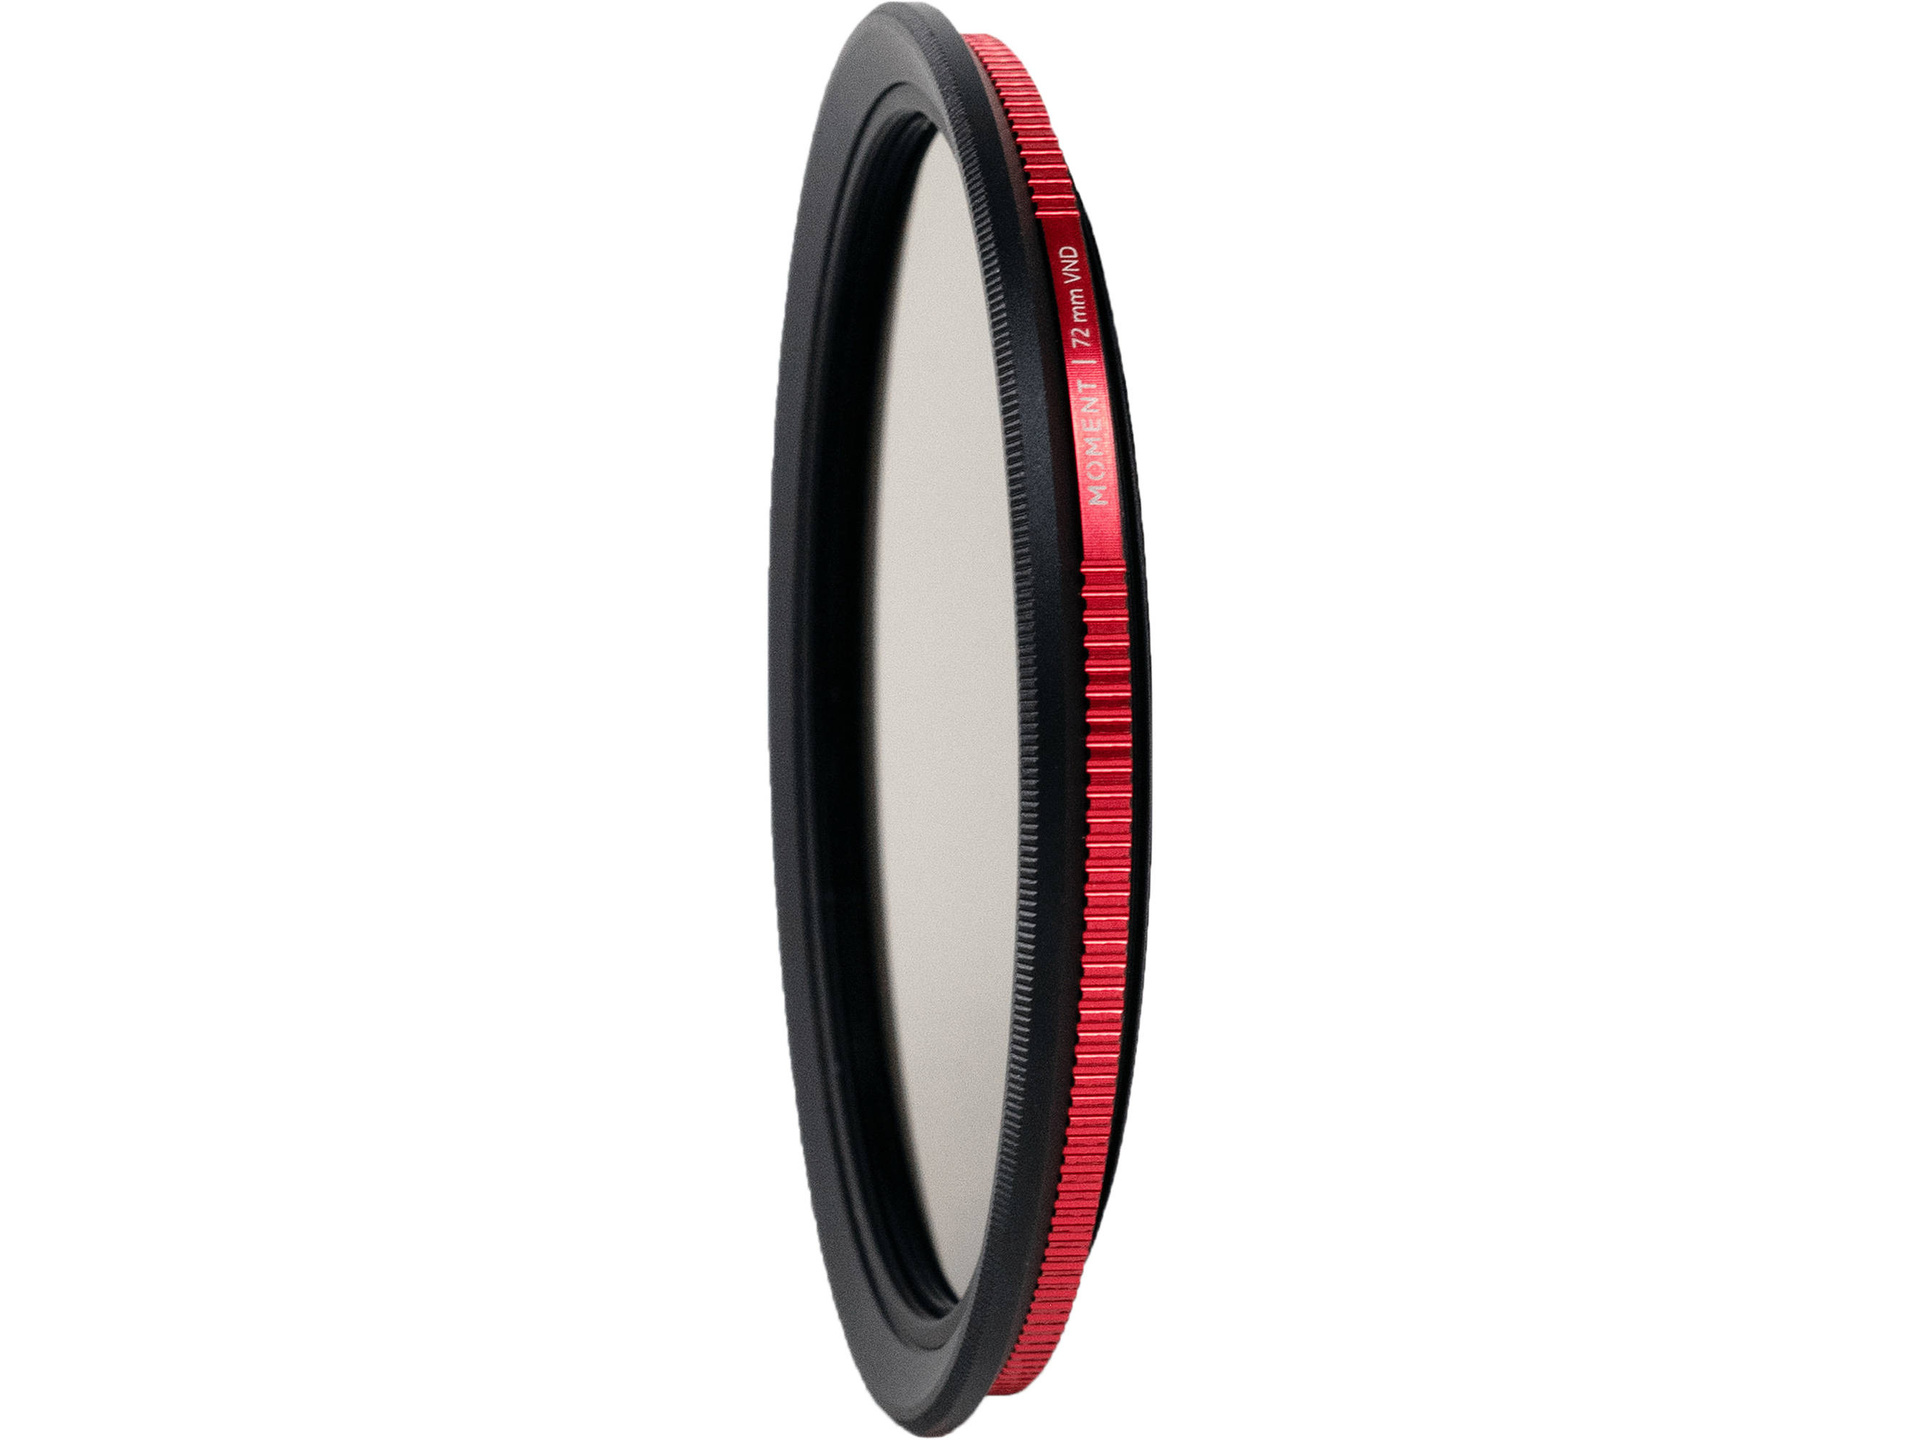 Moment 72mm Variable Neutral Density 1.8 to 2.7 Filter (6 to 9-Stop)